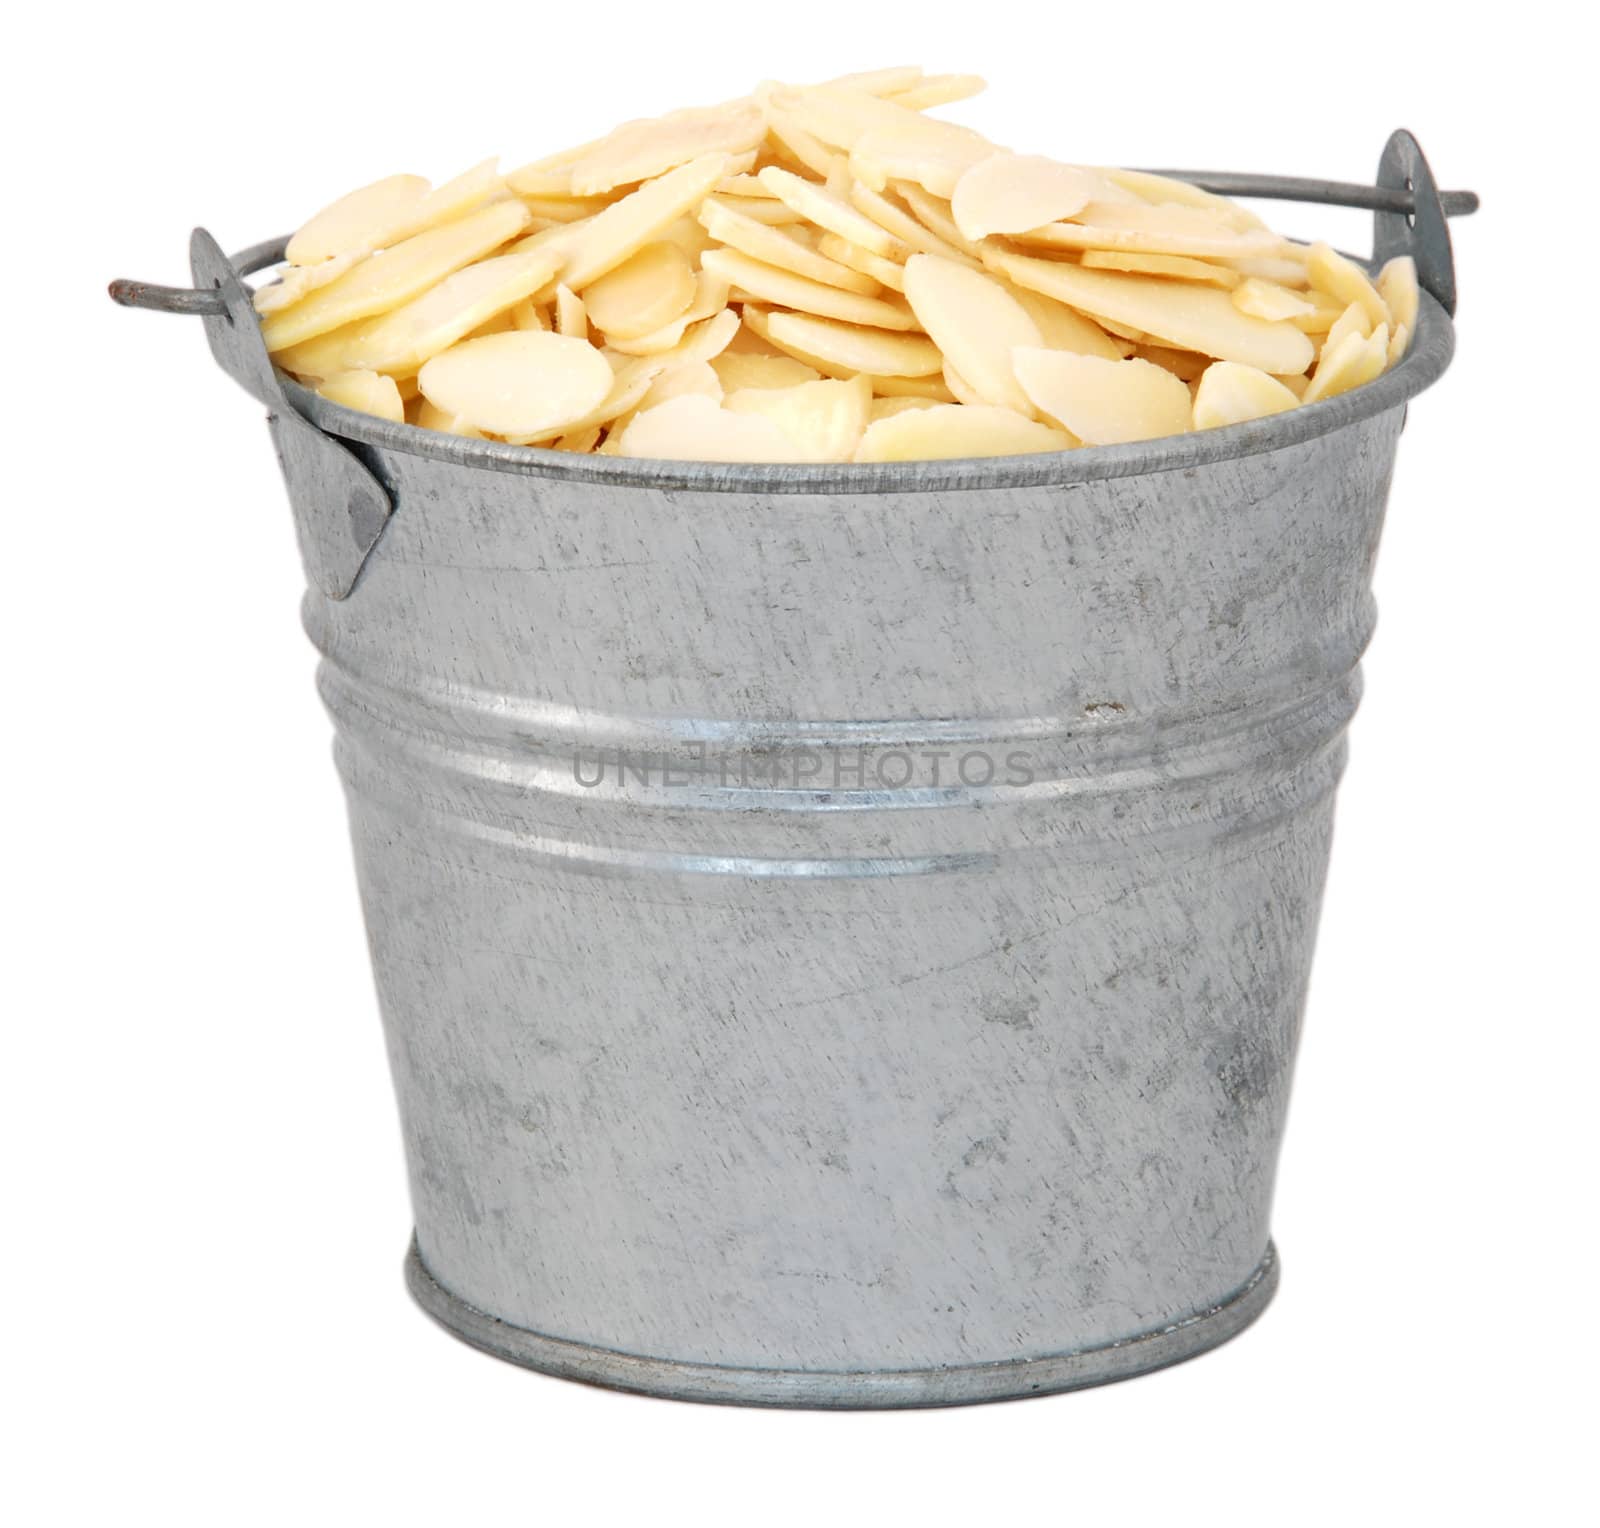 Flaked almonds in a miniature metal bucket, isolated on a white background